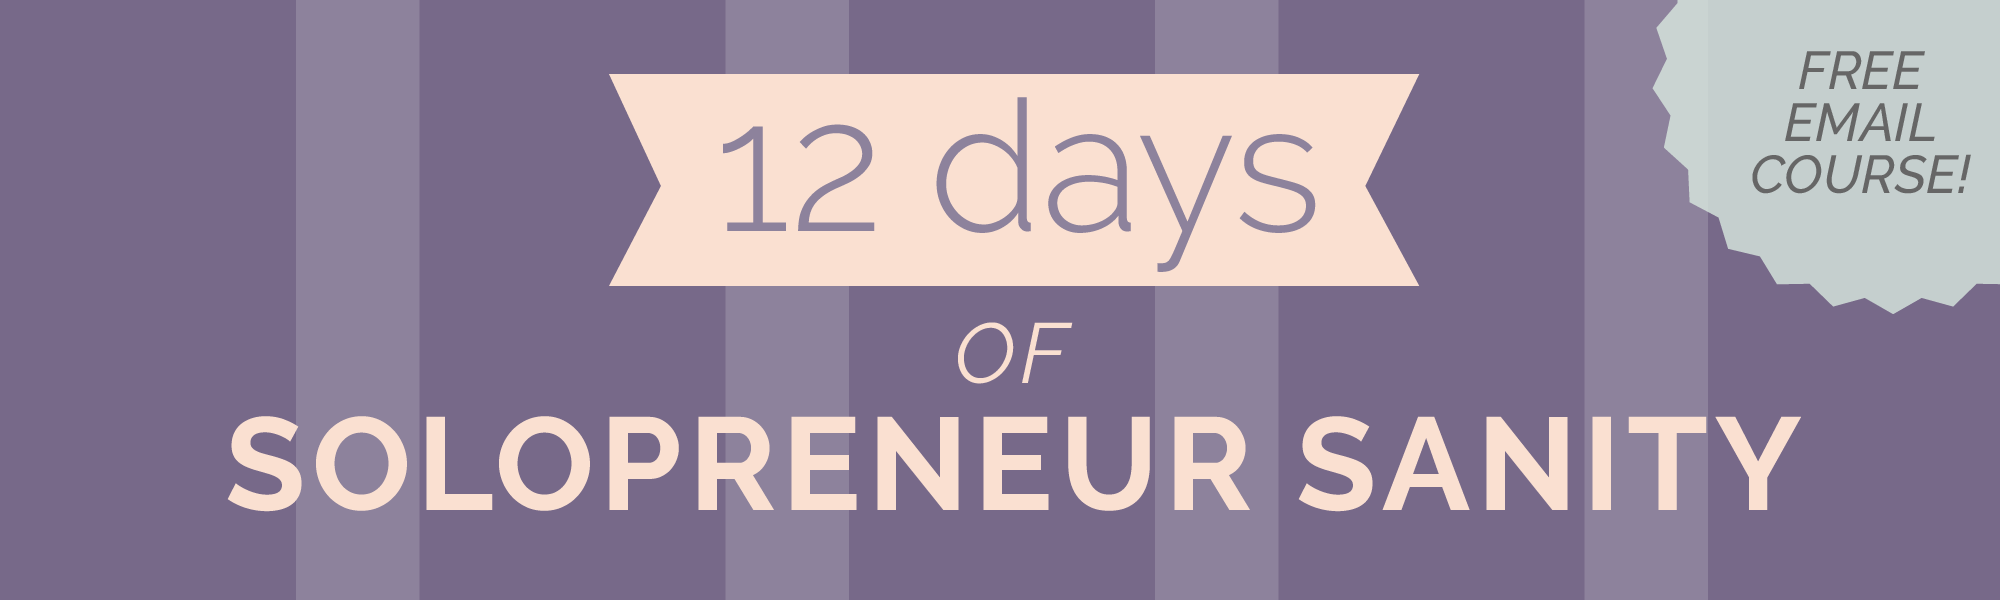 Free email course: 12 Days to Solopreneur Sanity - bite-sized practices for when you're feeling overwhelmed and underappreciated in your solopreneur business.